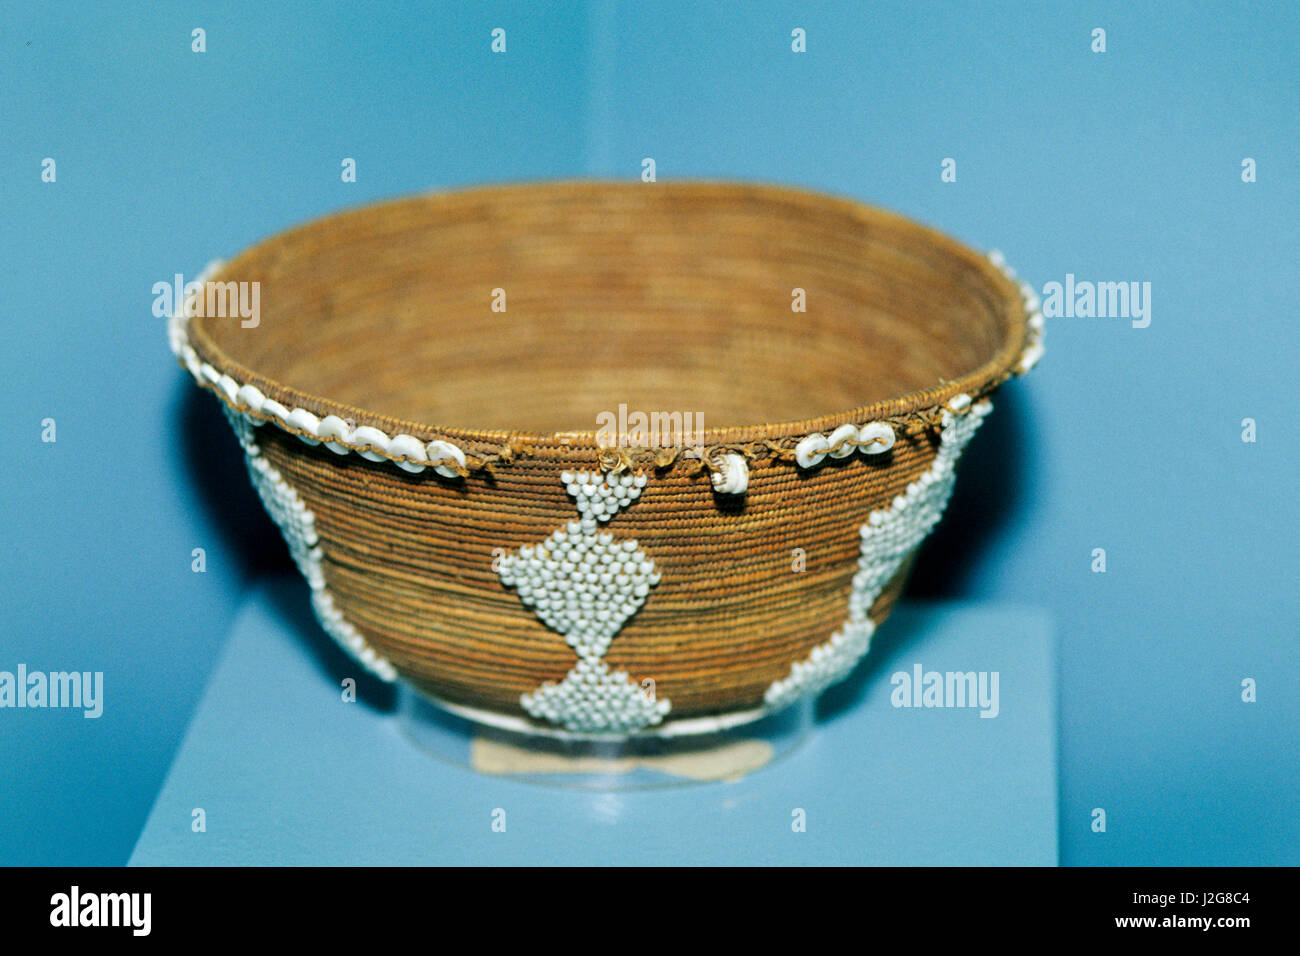 Pomo jewel basket decorated with puka shells and white seed beads. Stock Photo